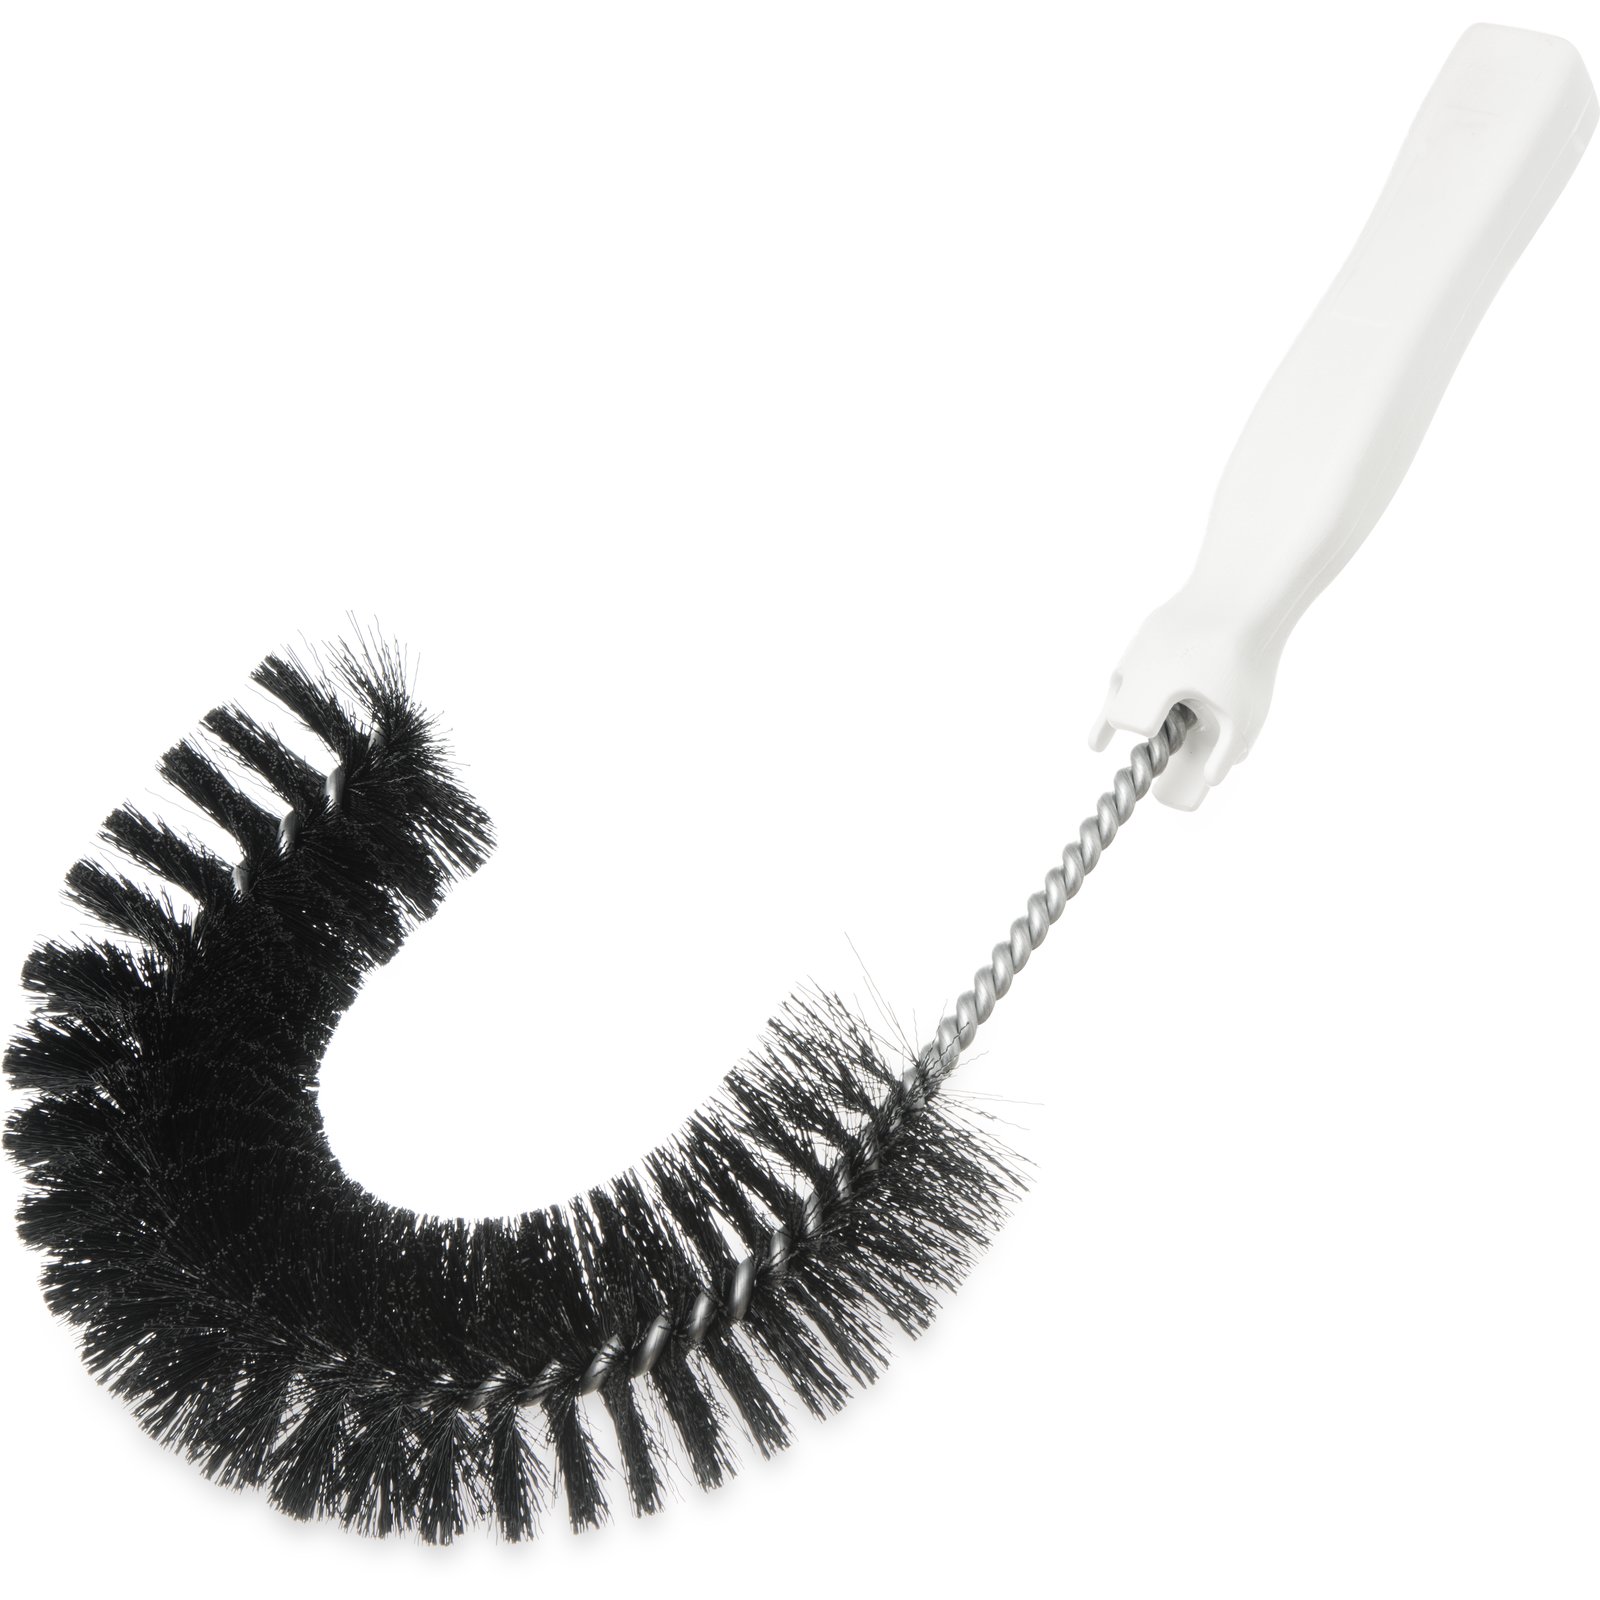 CLEAN IN PLACE HOOK BRUSH
11-1/2&quot; (12/CS)
THERE IS A $10 BROKEN CASE FEE